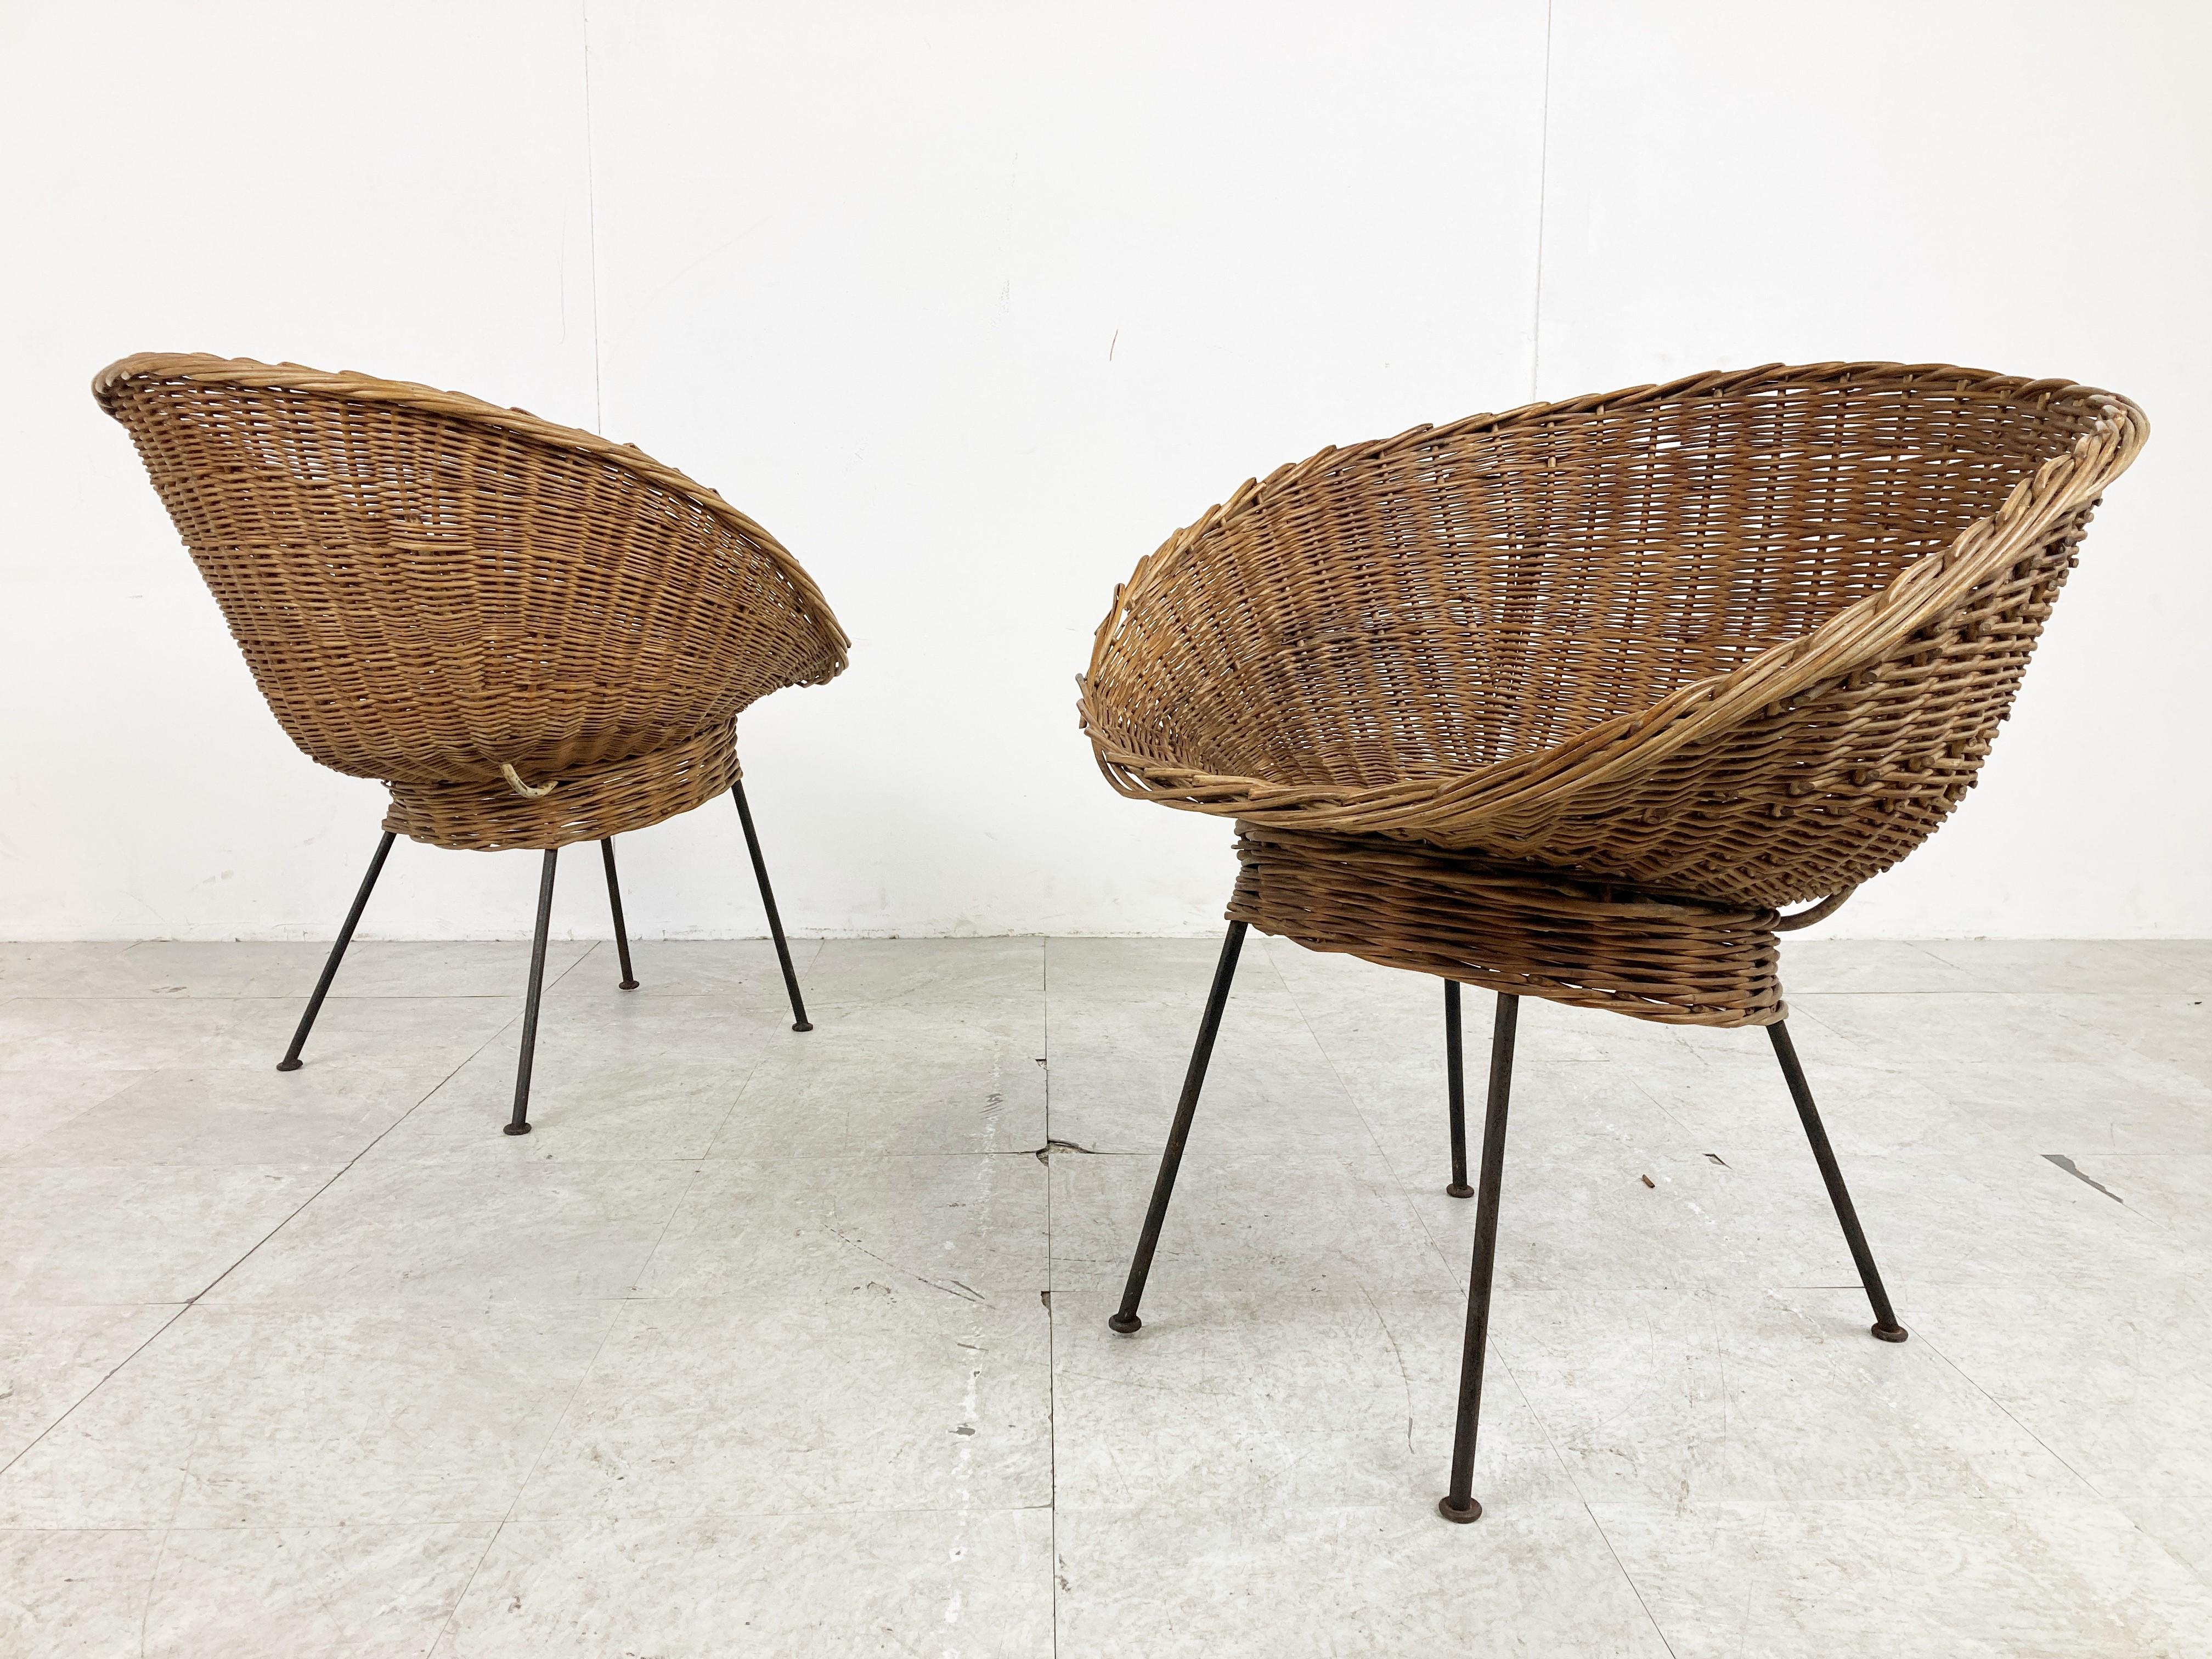 Elegant midcentury italian wicker side chairs or lounge chairs.

Timeless and decorative pieces.

Can be used both in-and outside.

Wicker bucket seats with slim black metal legs.

Good condition.

1960s - Italy

Height: